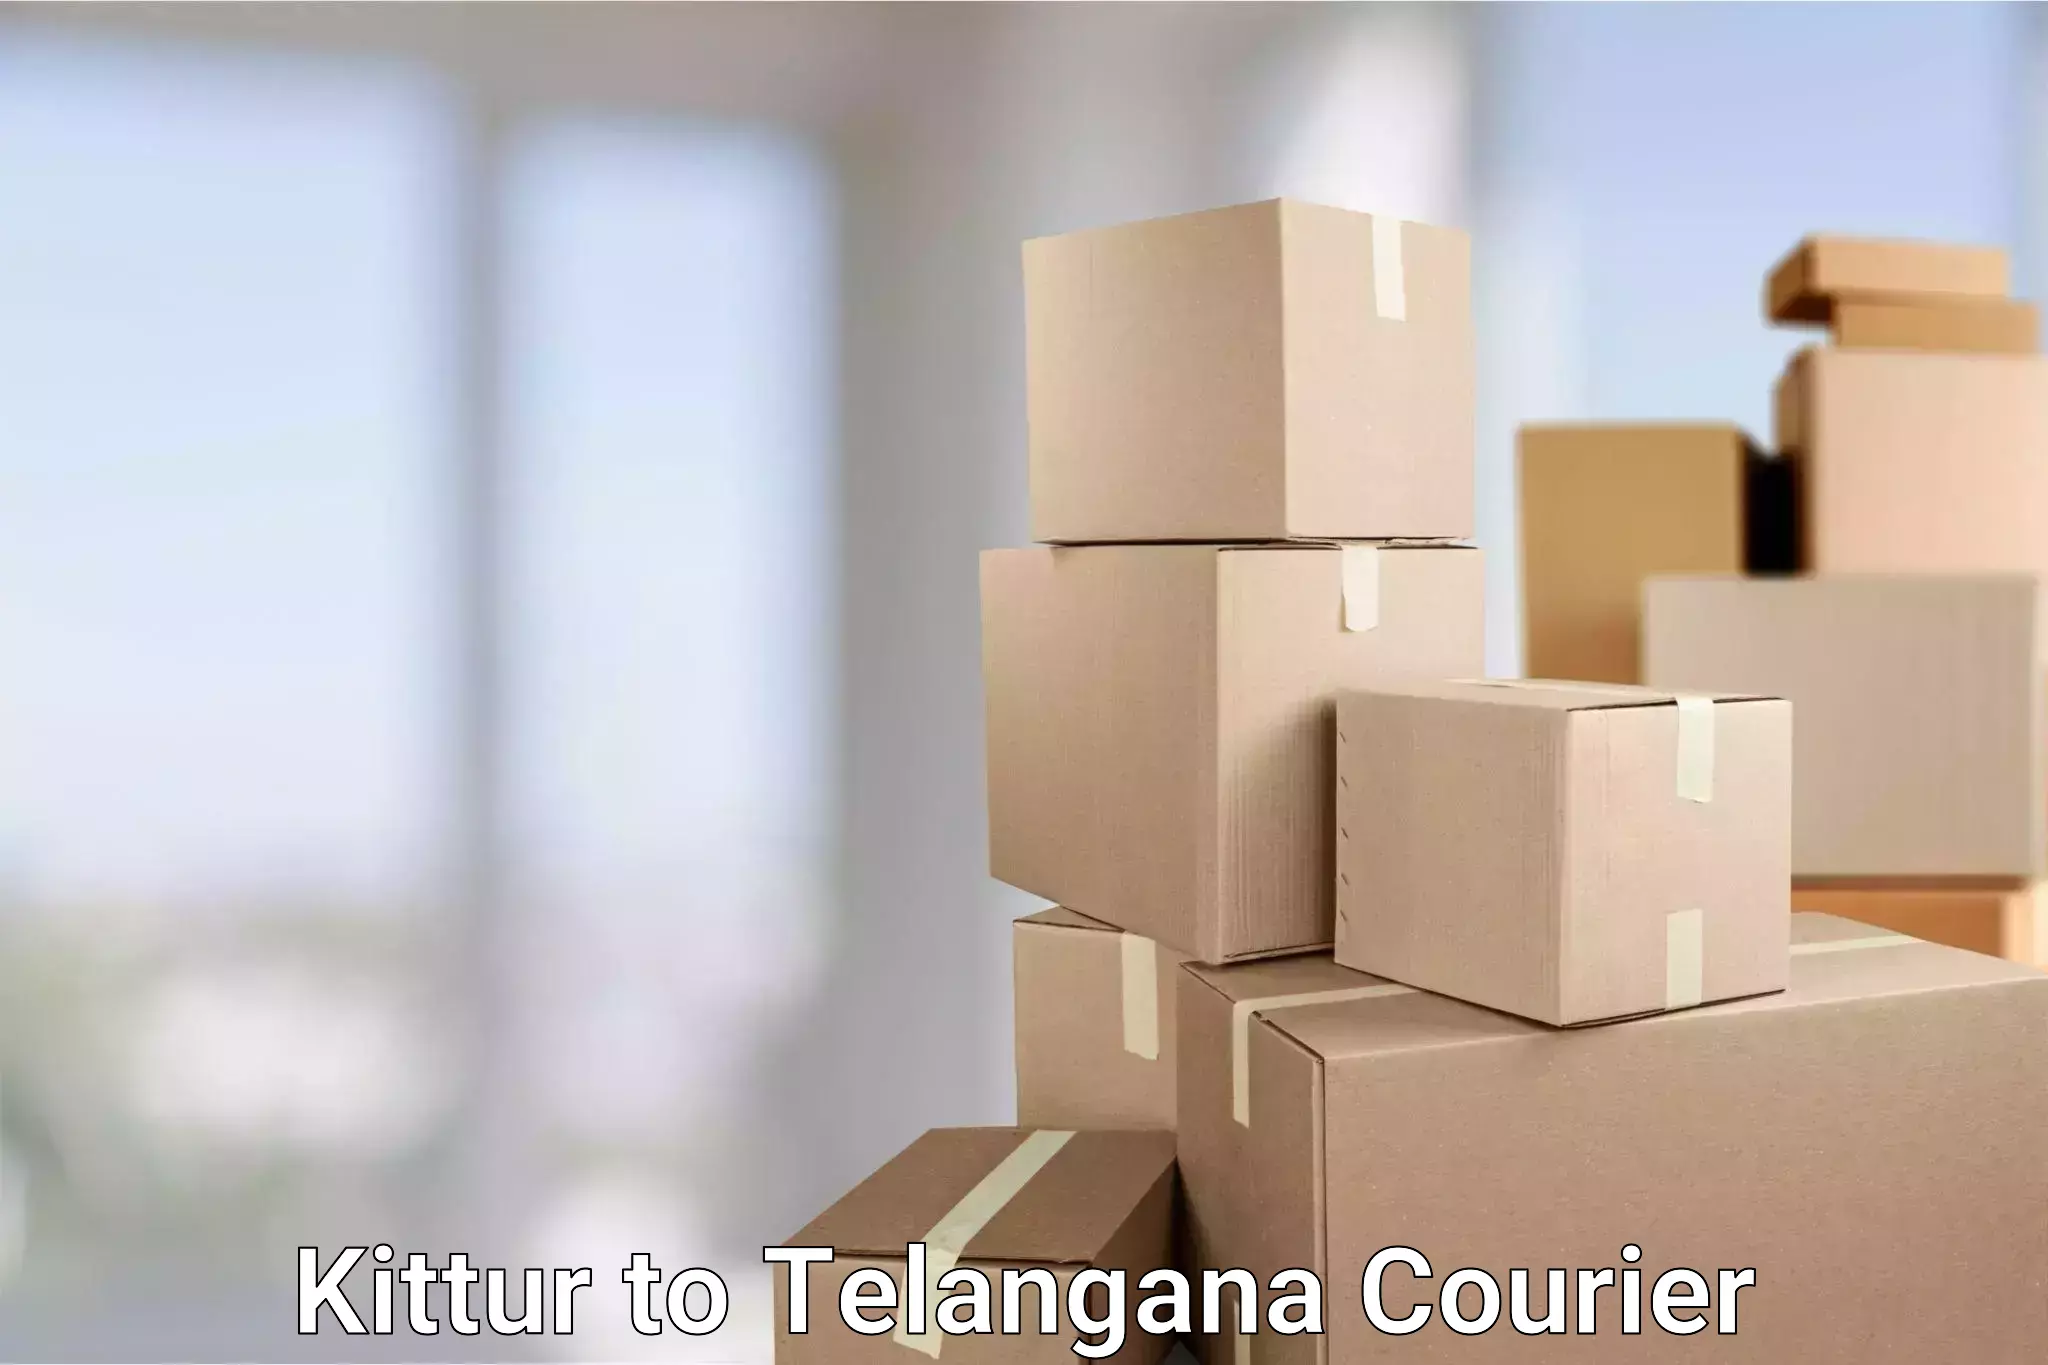 Express delivery capabilities in Kittur to Manneguda